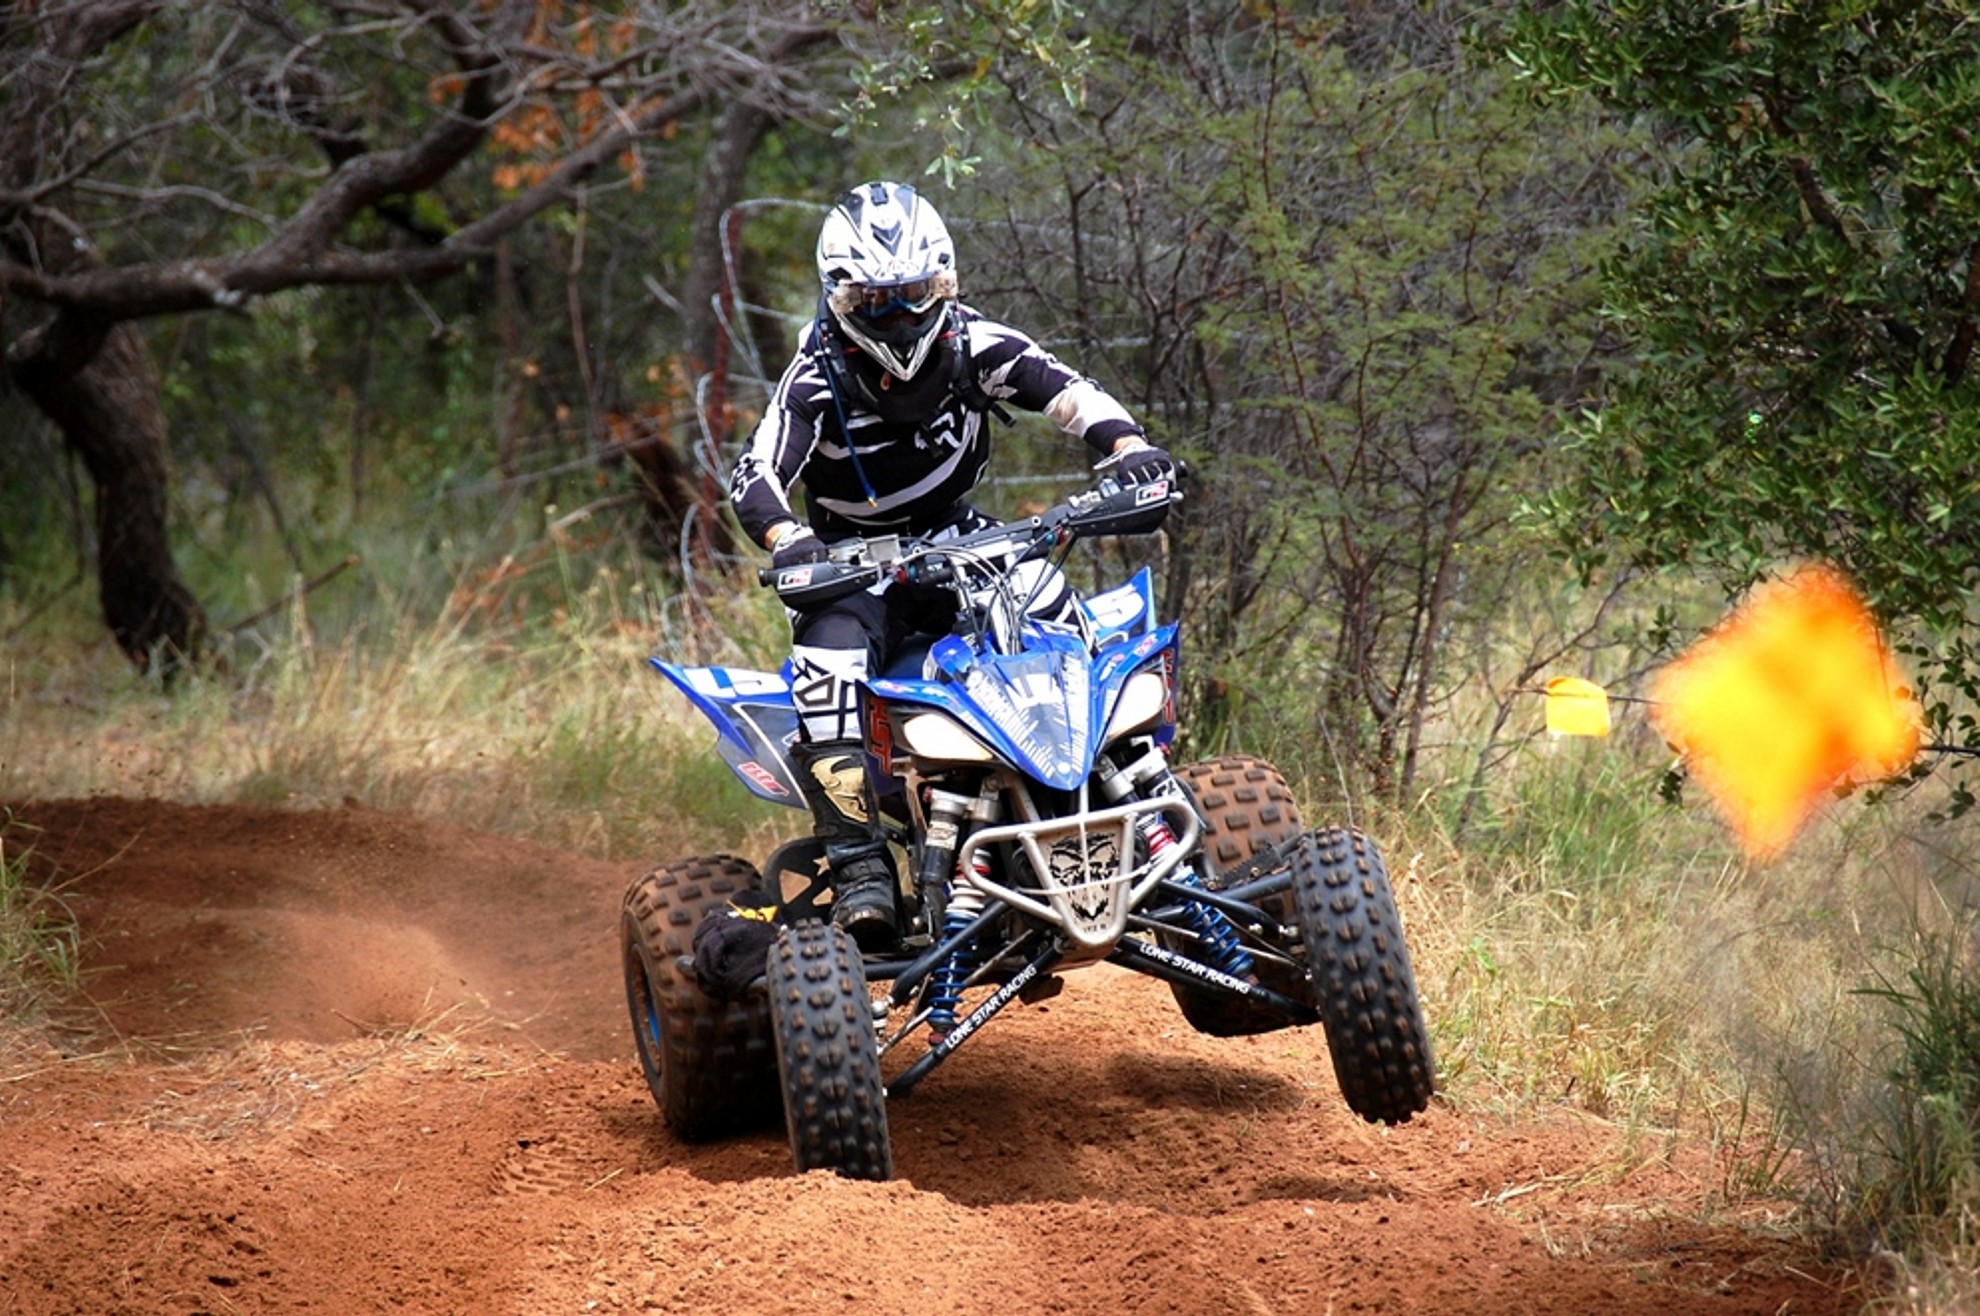 2013 SOUTH AFRICAN NATIONAL OFF-ROAD MOTORCYCLE & QUAD CHAMPIOINSHIP